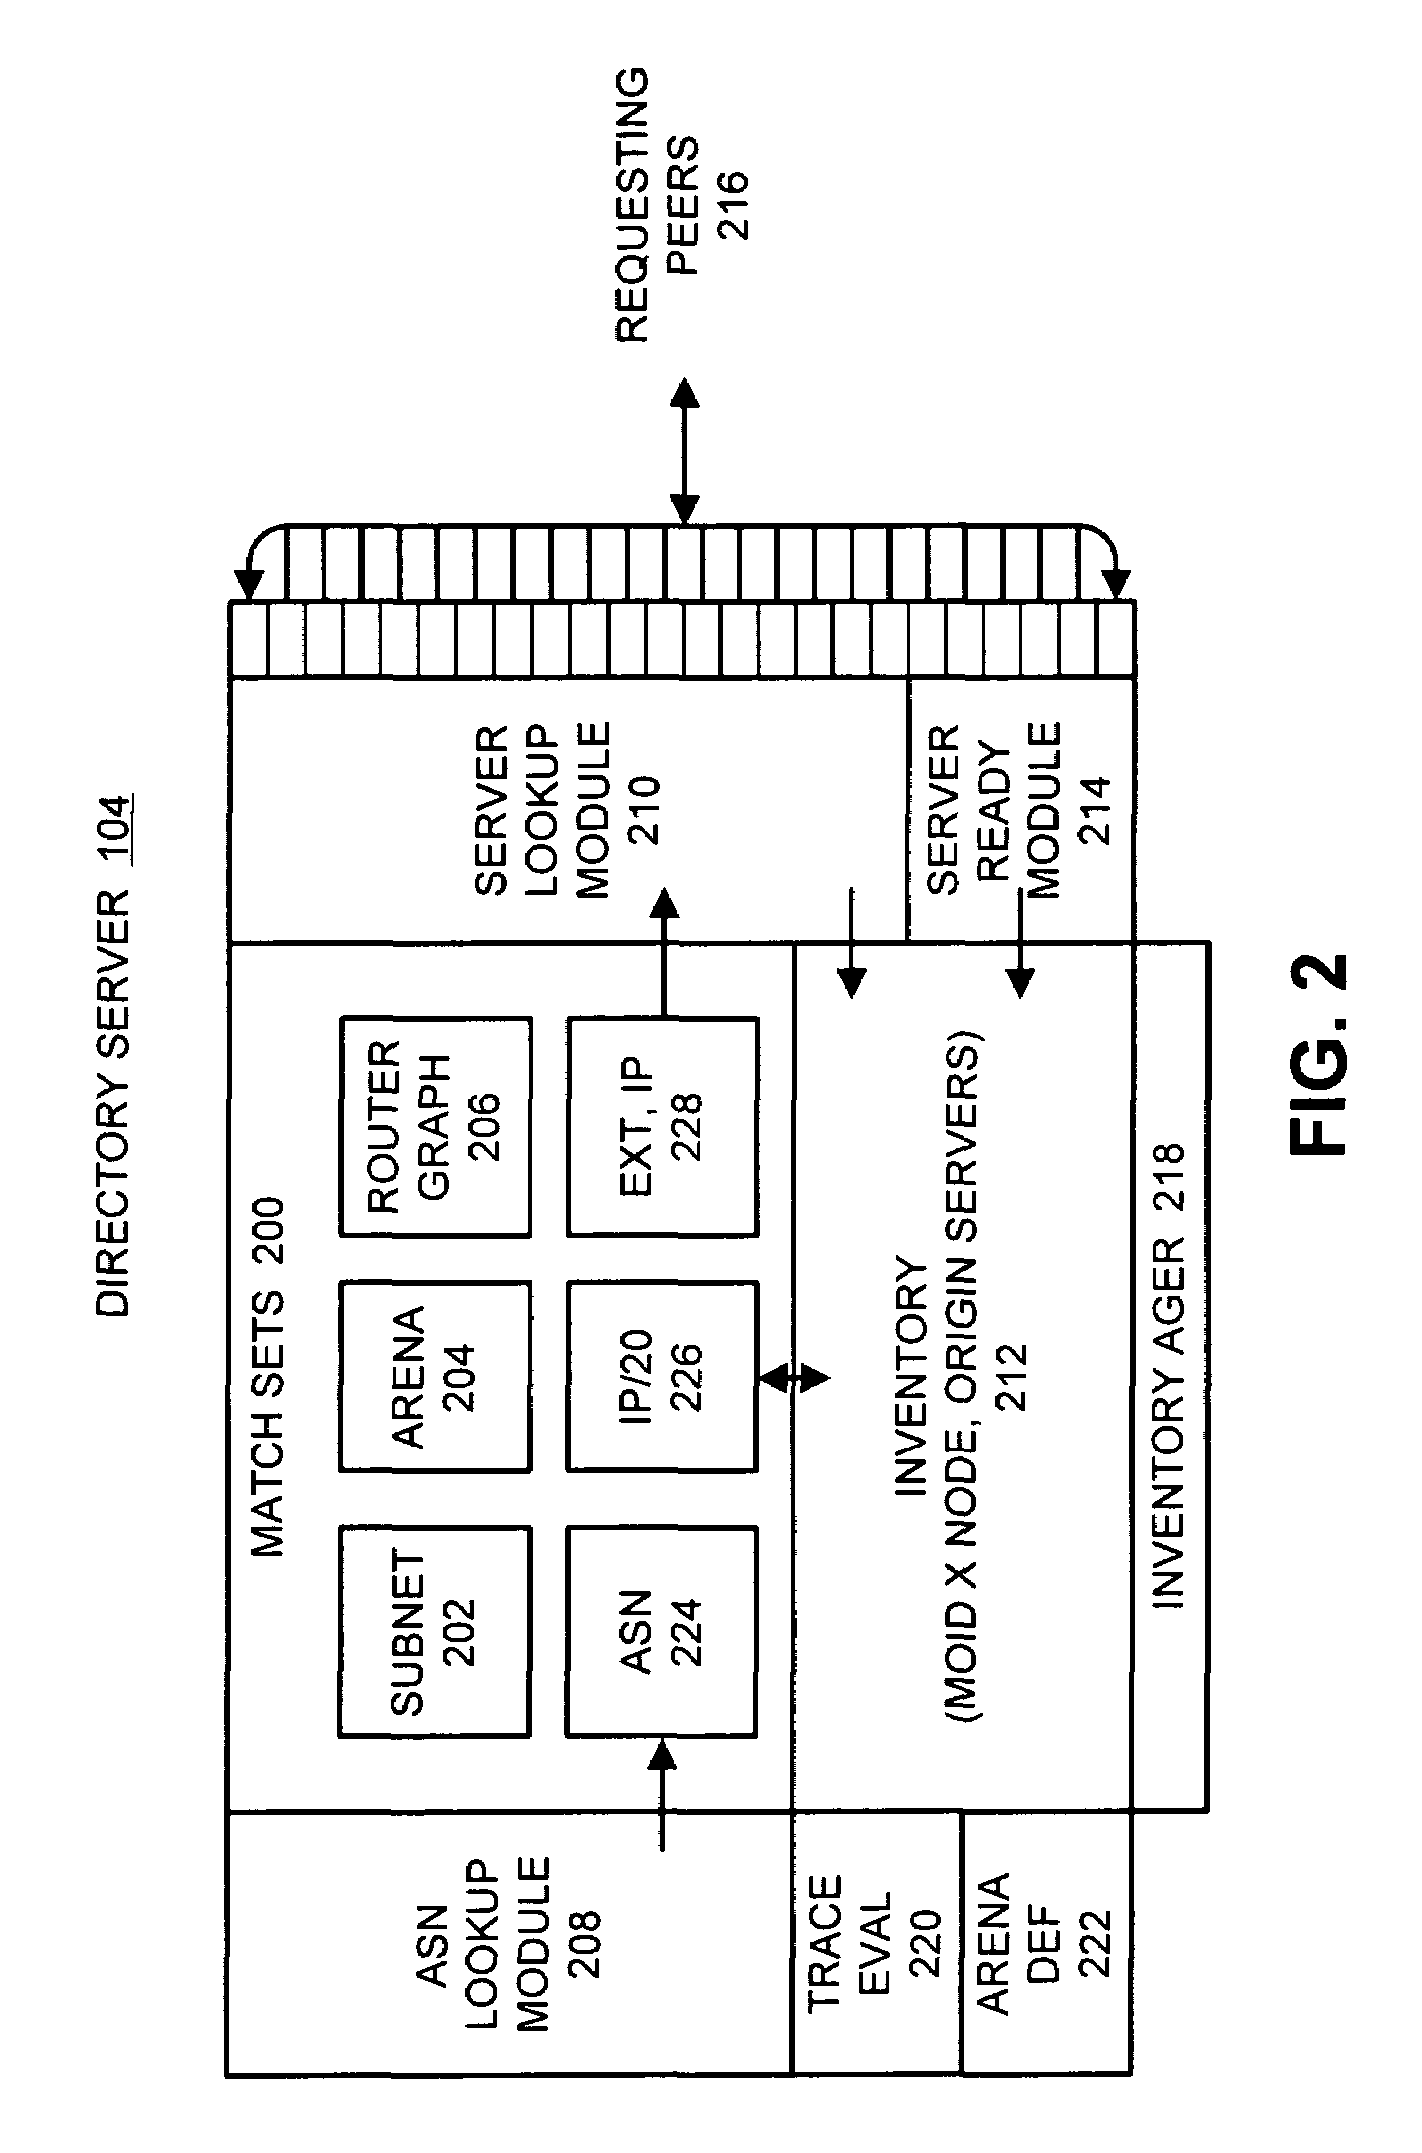 Method and apparatus for determining network topology in a peer-to-peer network